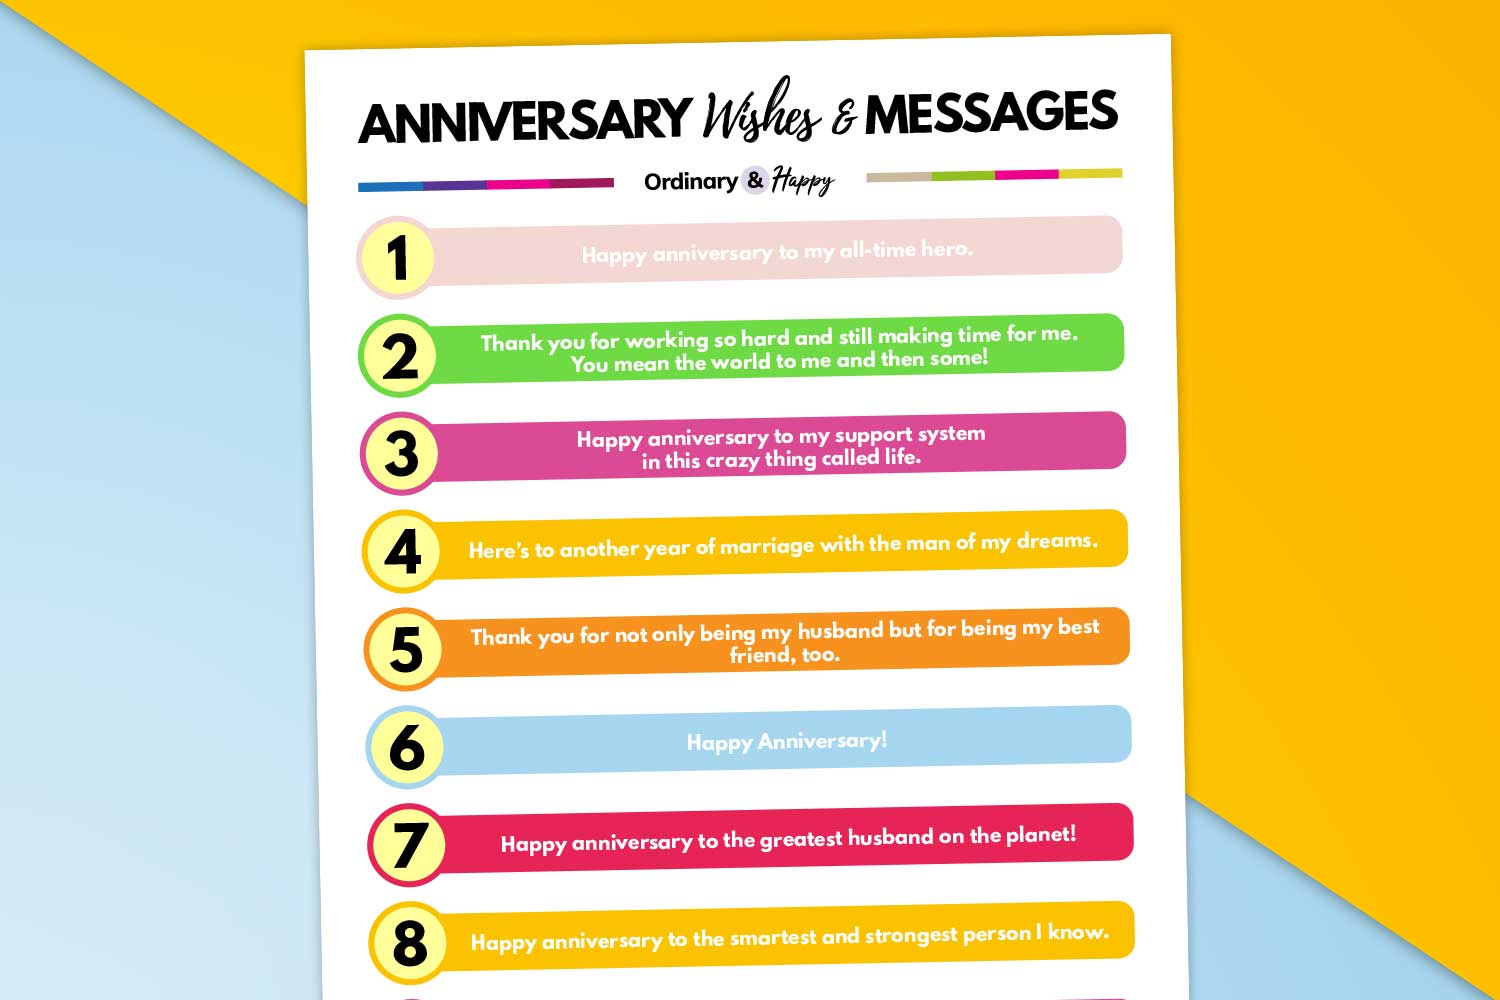 100+ Anniversary Wishes and Messages to Make Your Partner Feel Loved